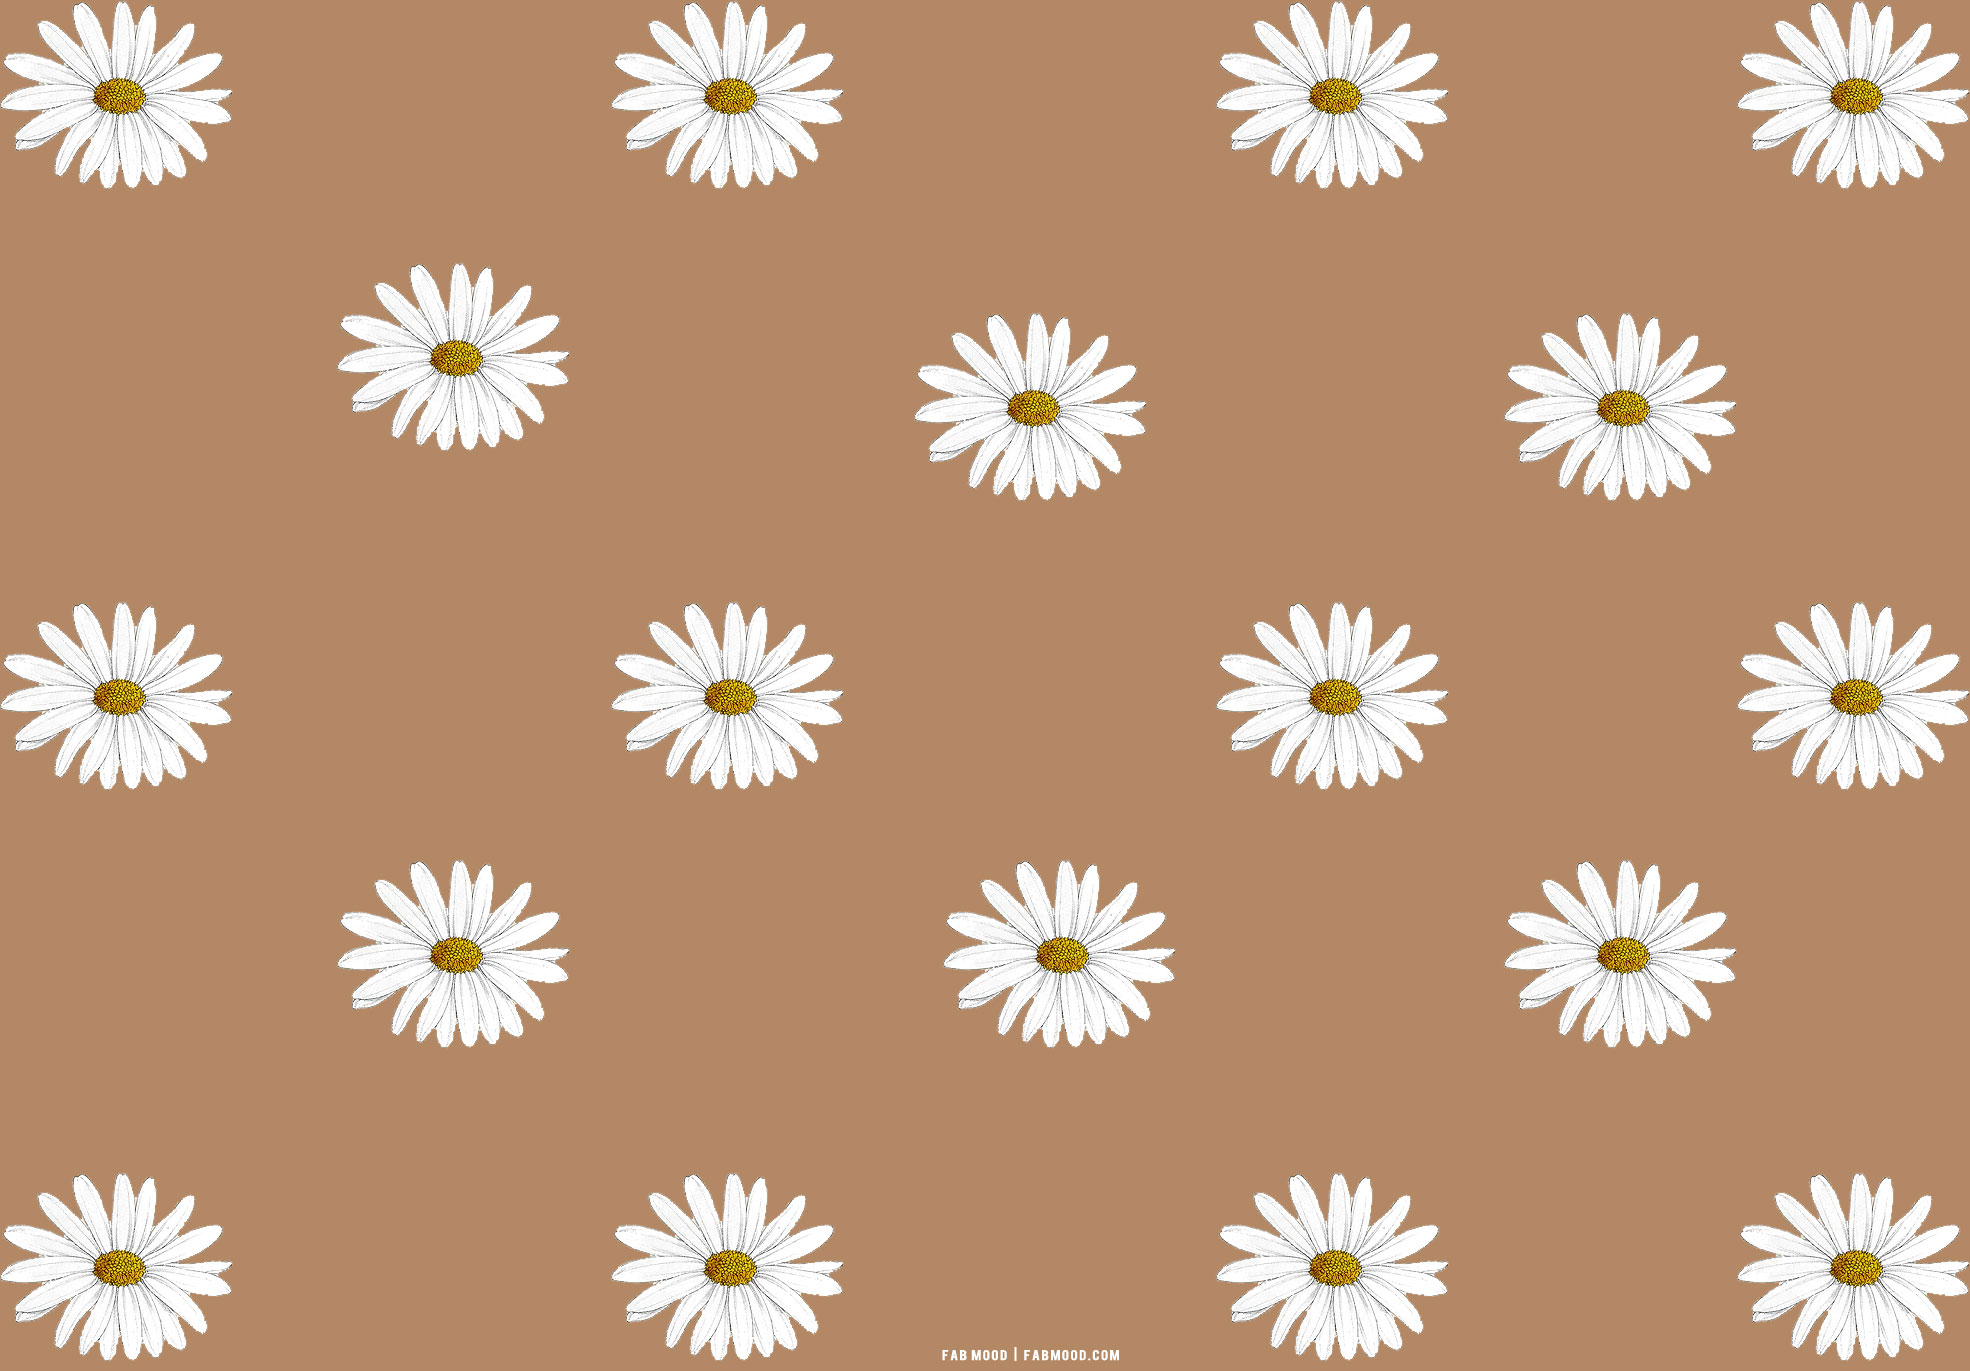 25 Brown Aesthetic Wallpaper for Laptop : Daisy Daisy 1 - Fab Mood